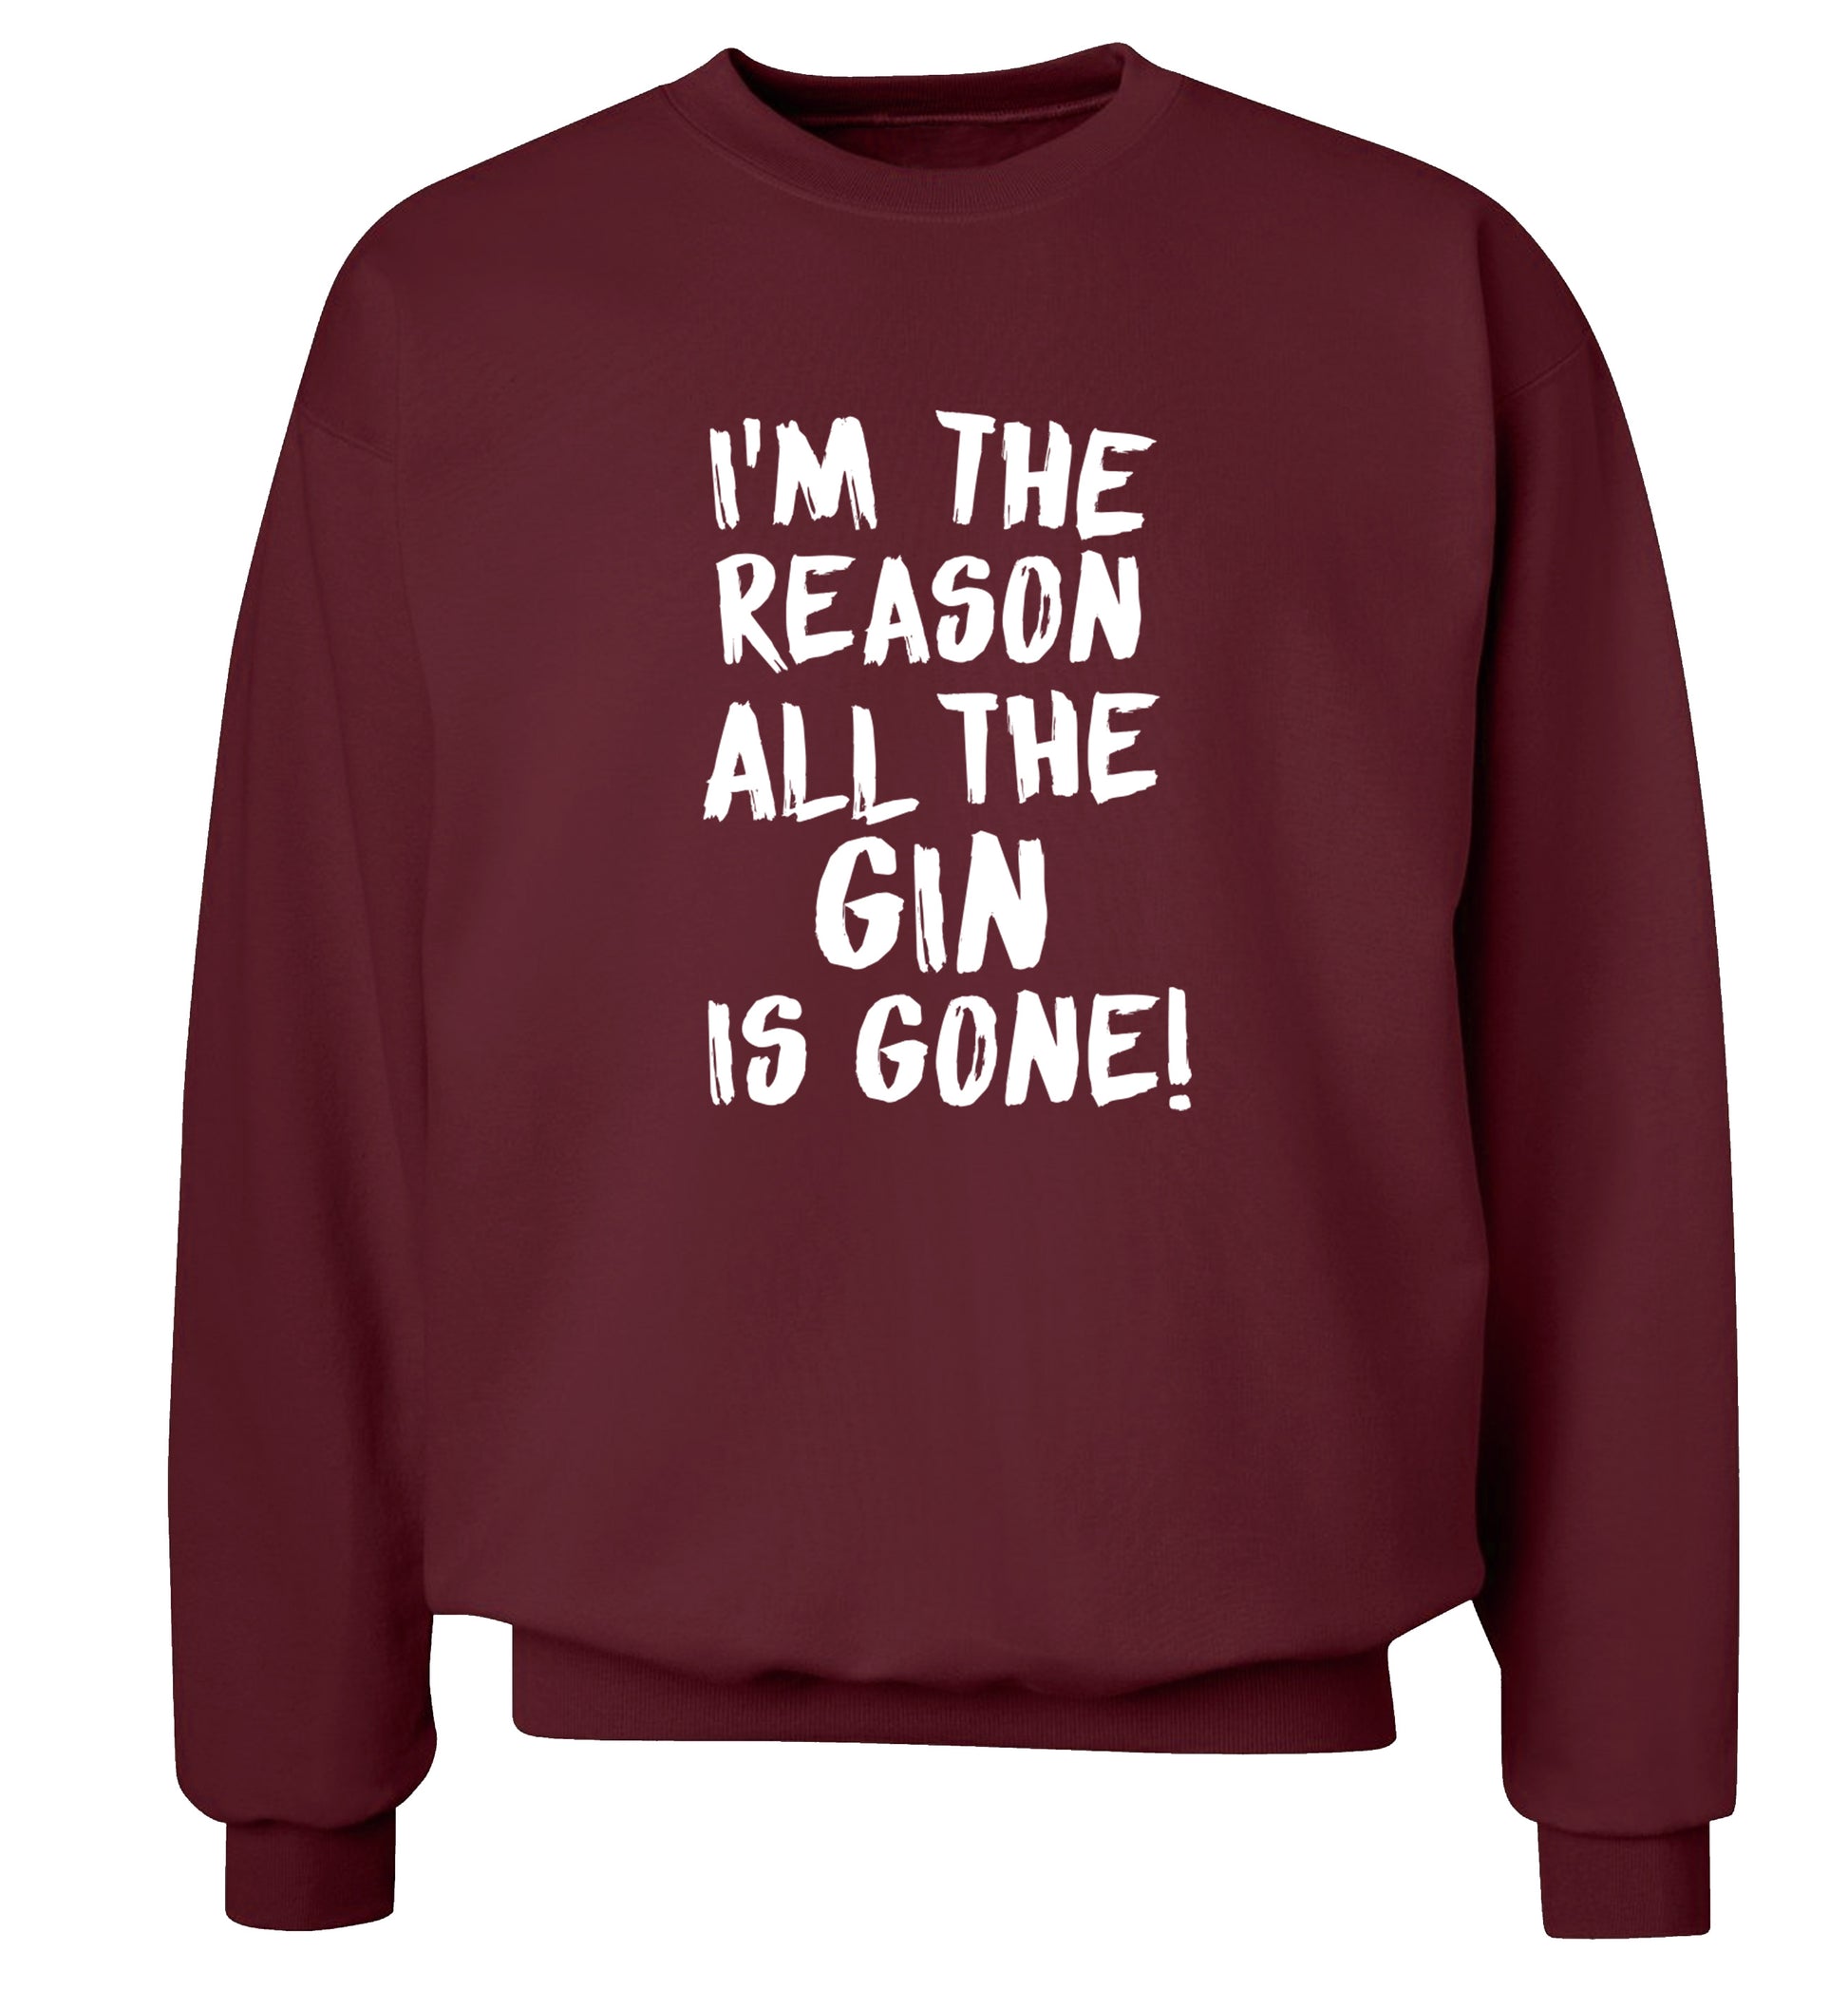 I'm the reason all the gin is gone Adult's unisex maroon Sweater 2XL